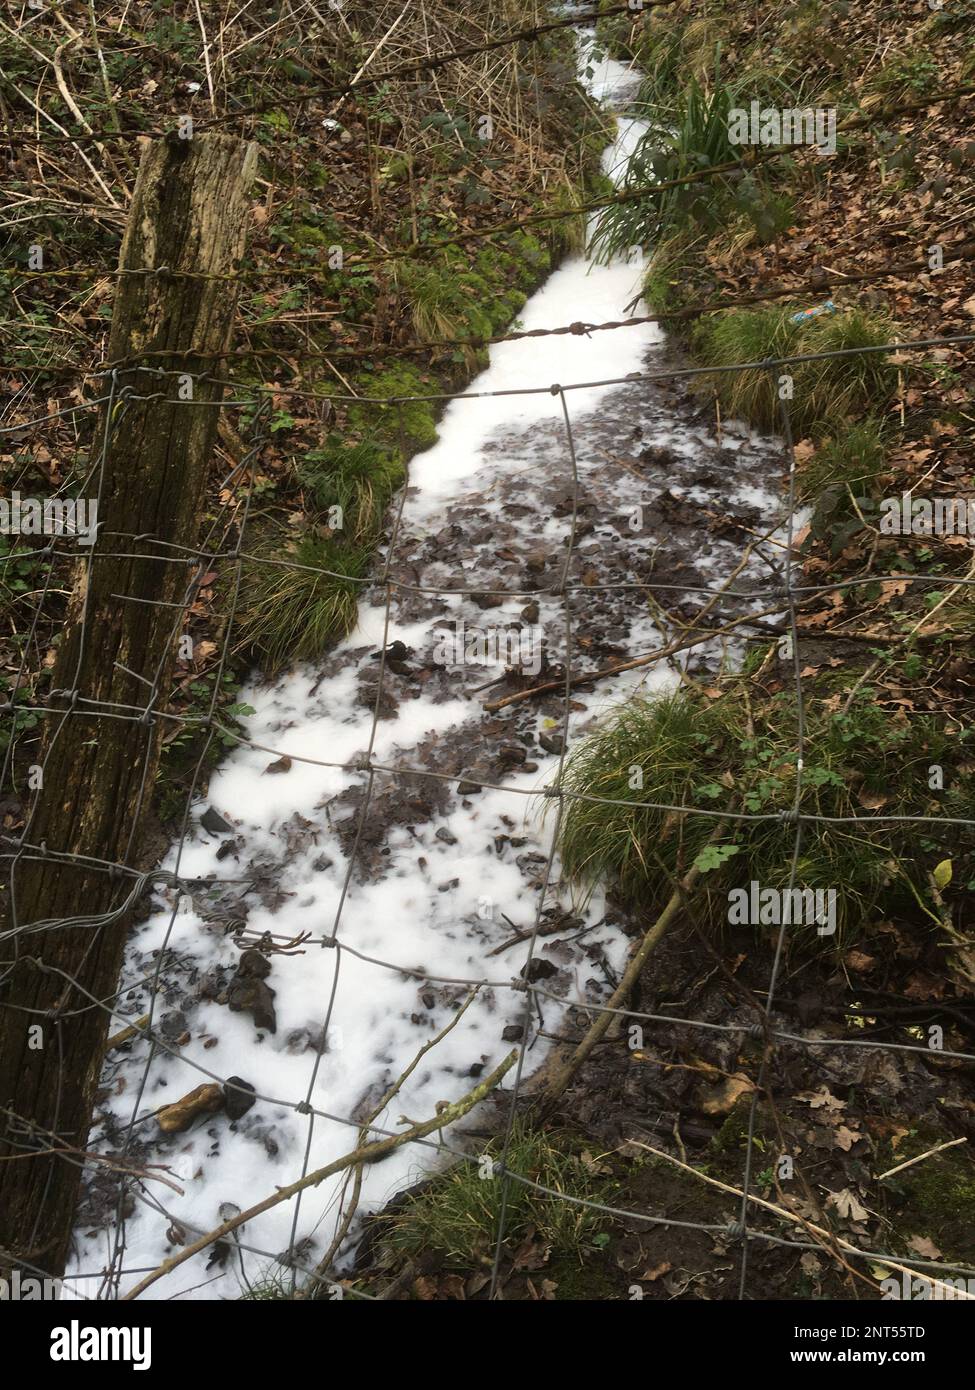 Unknown white substance, possibly emulsion paint, has been discharged into this once pristine stream near Canterbury, Kent UK. Stock Photo